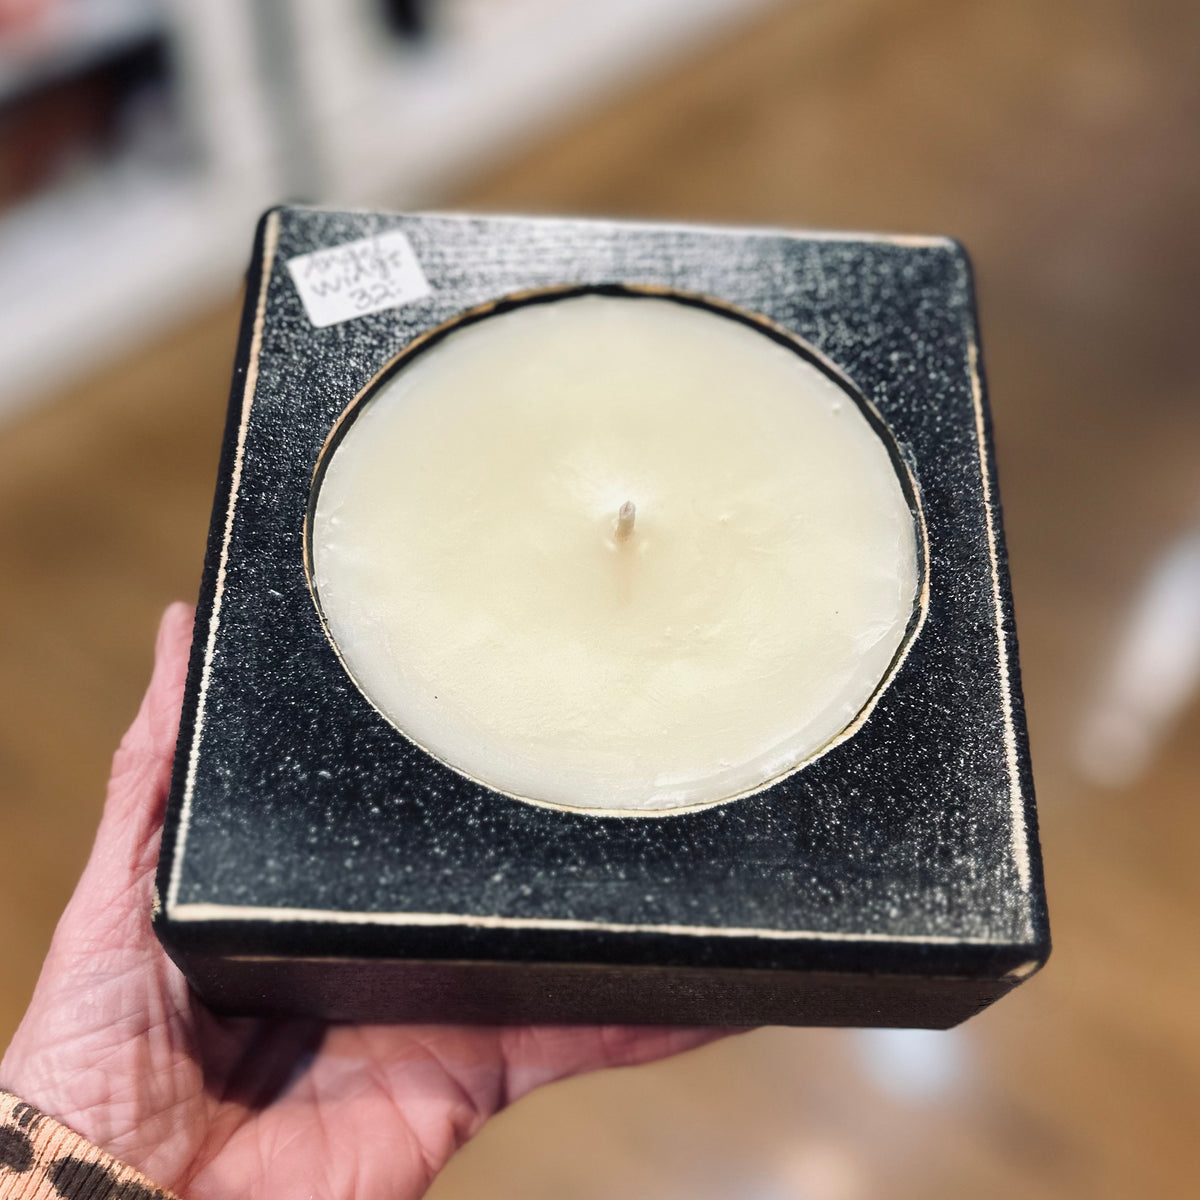 Cheese Mold Candles